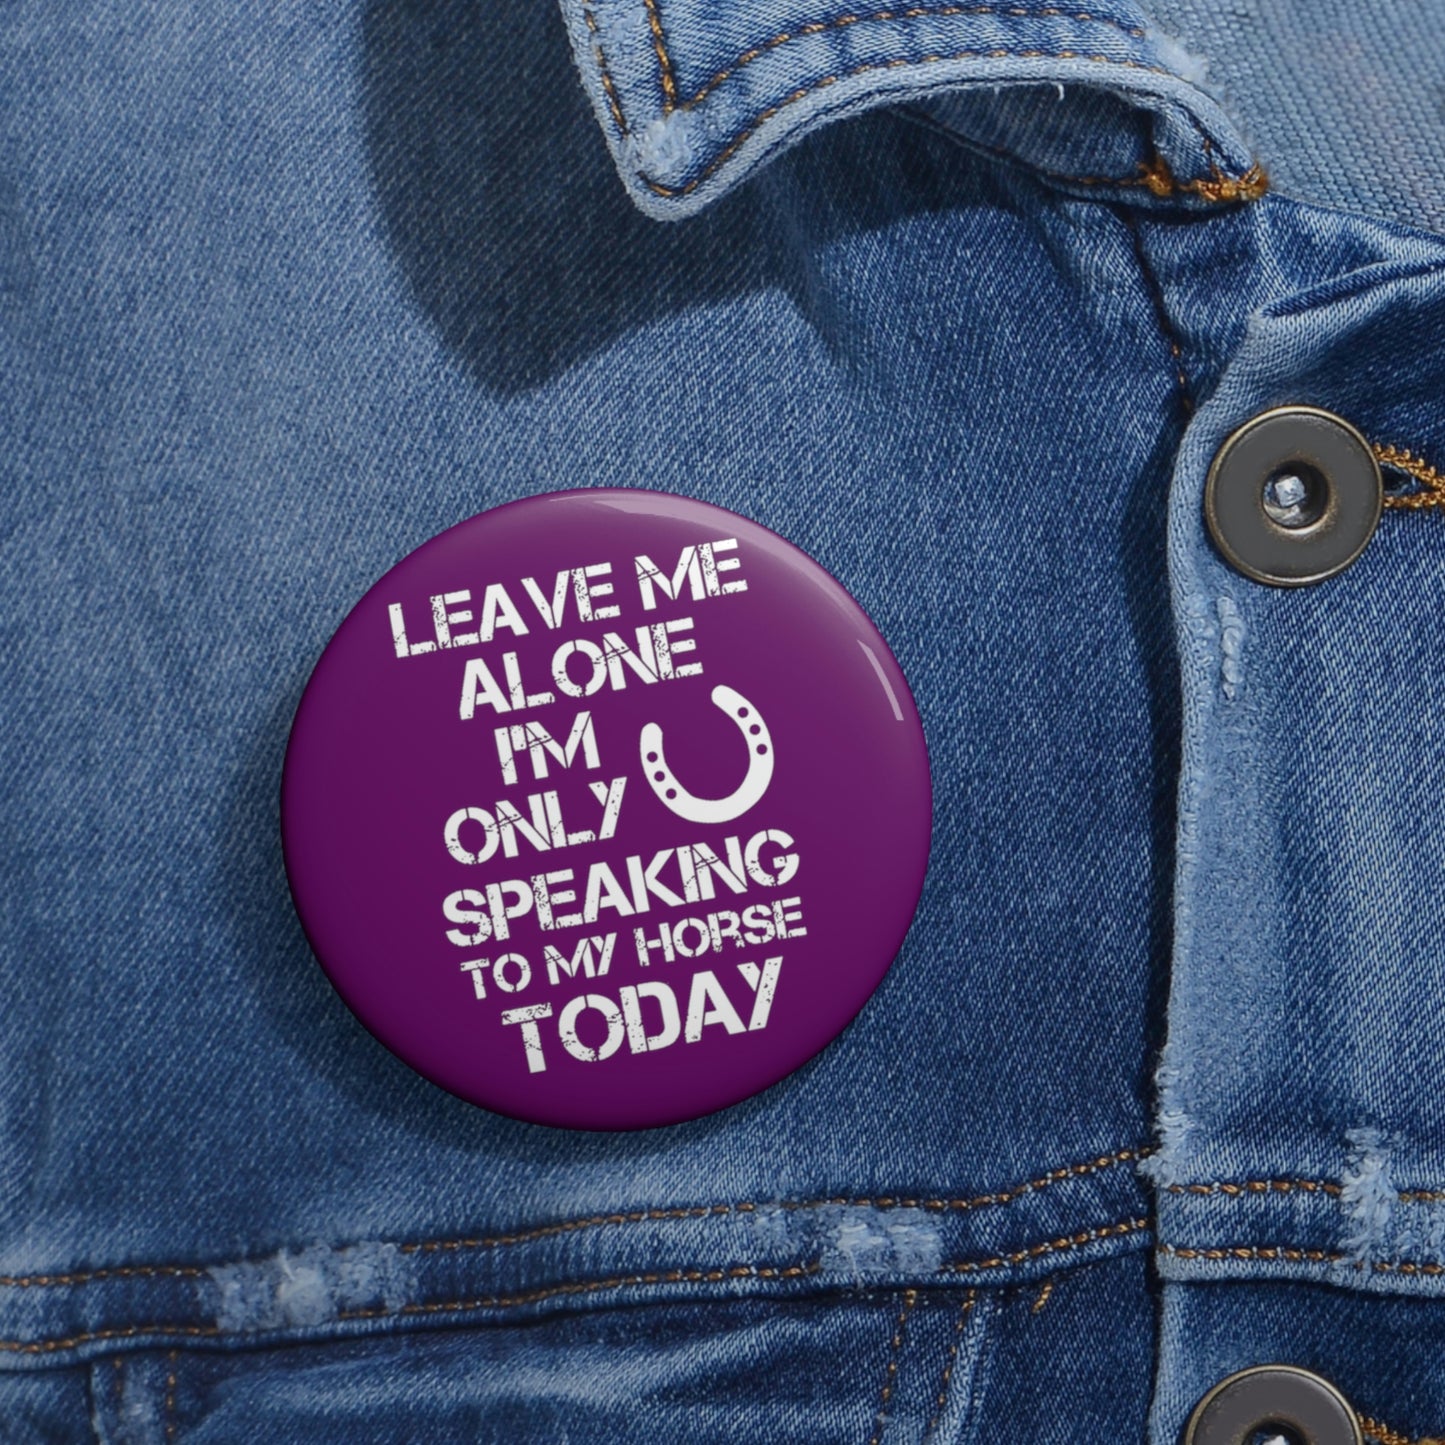 Leave Me Alone - Custom Pin Buttons - Purple / White